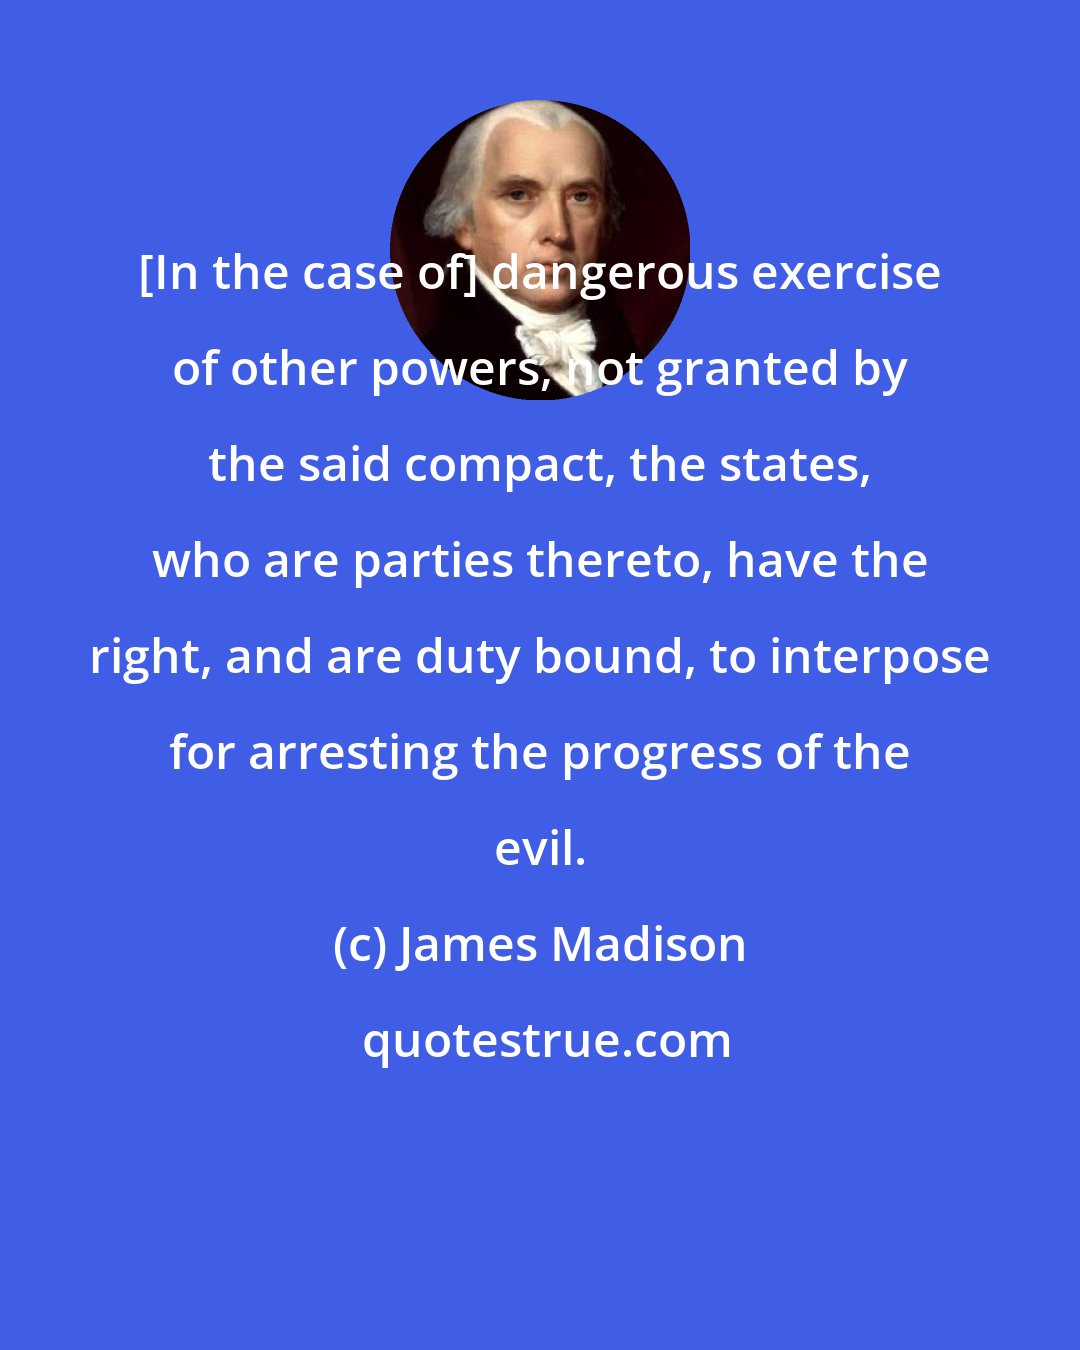 James Madison: [In the case of] dangerous exercise of other powers, not granted by the said compact, the states, who are parties thereto, have the right, and are duty bound, to interpose for arresting the progress of the evil.